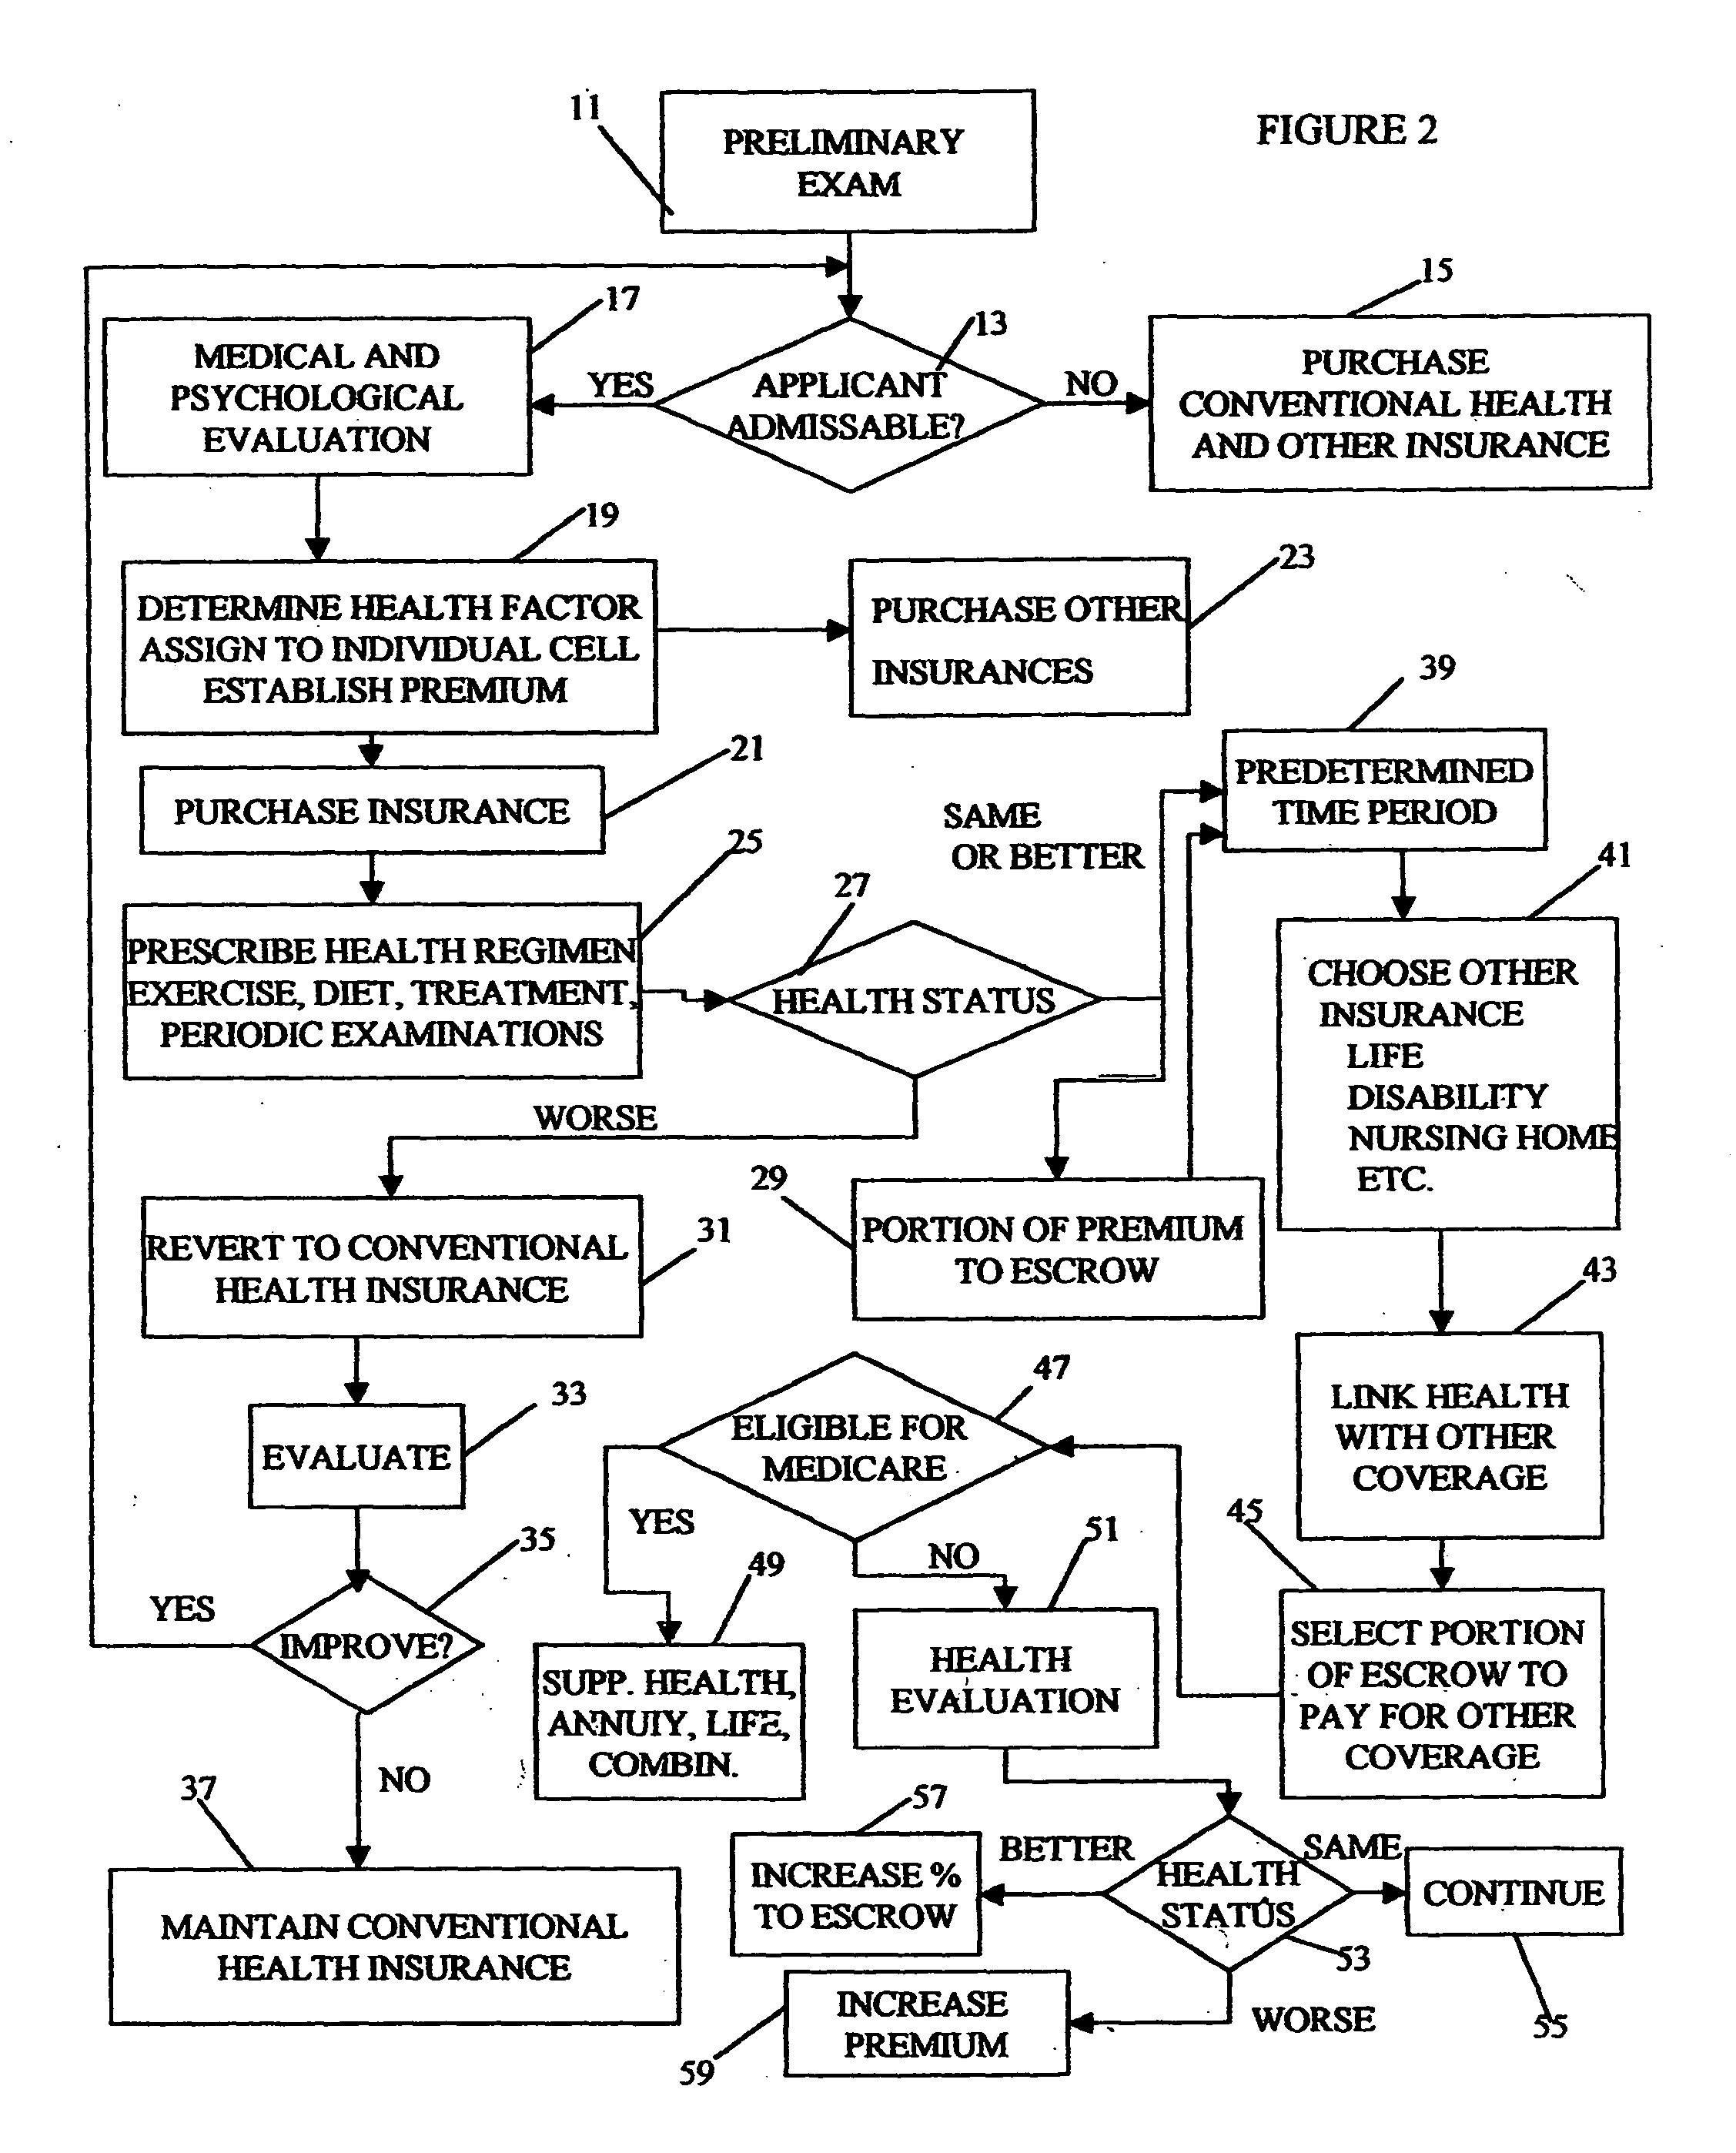 Method for linking insurance policies